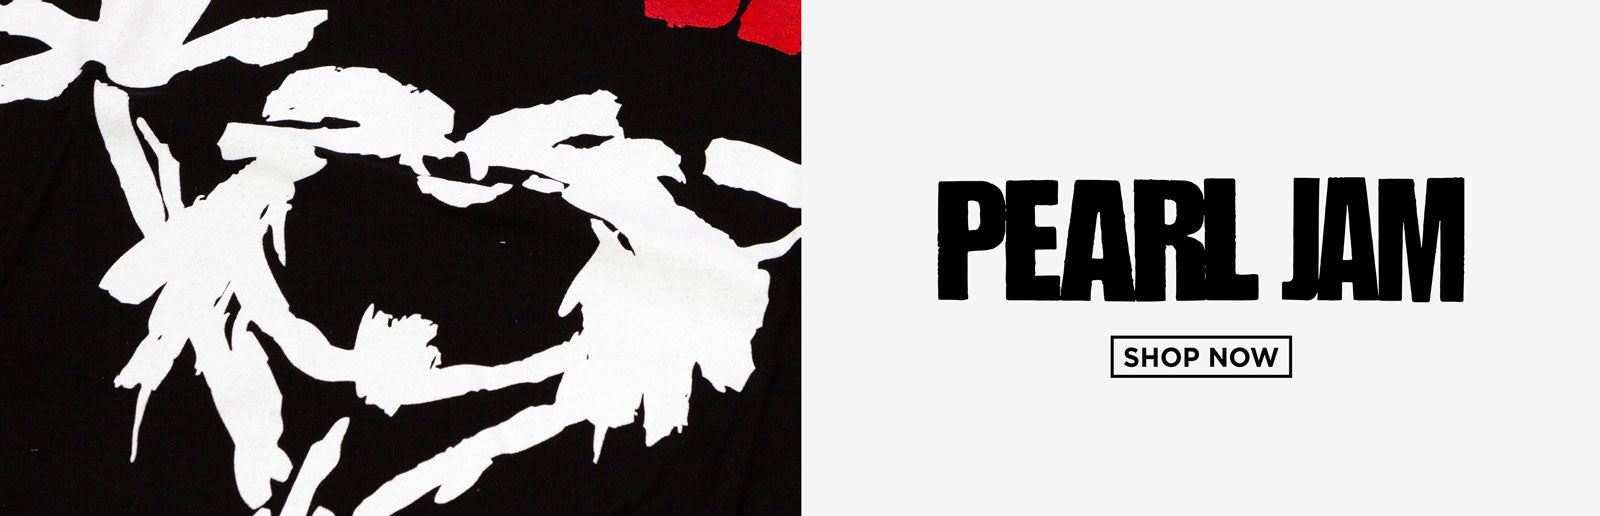 Tsurt Pearl Jam Choices 2-Sided T-Shirt Size: Large Black